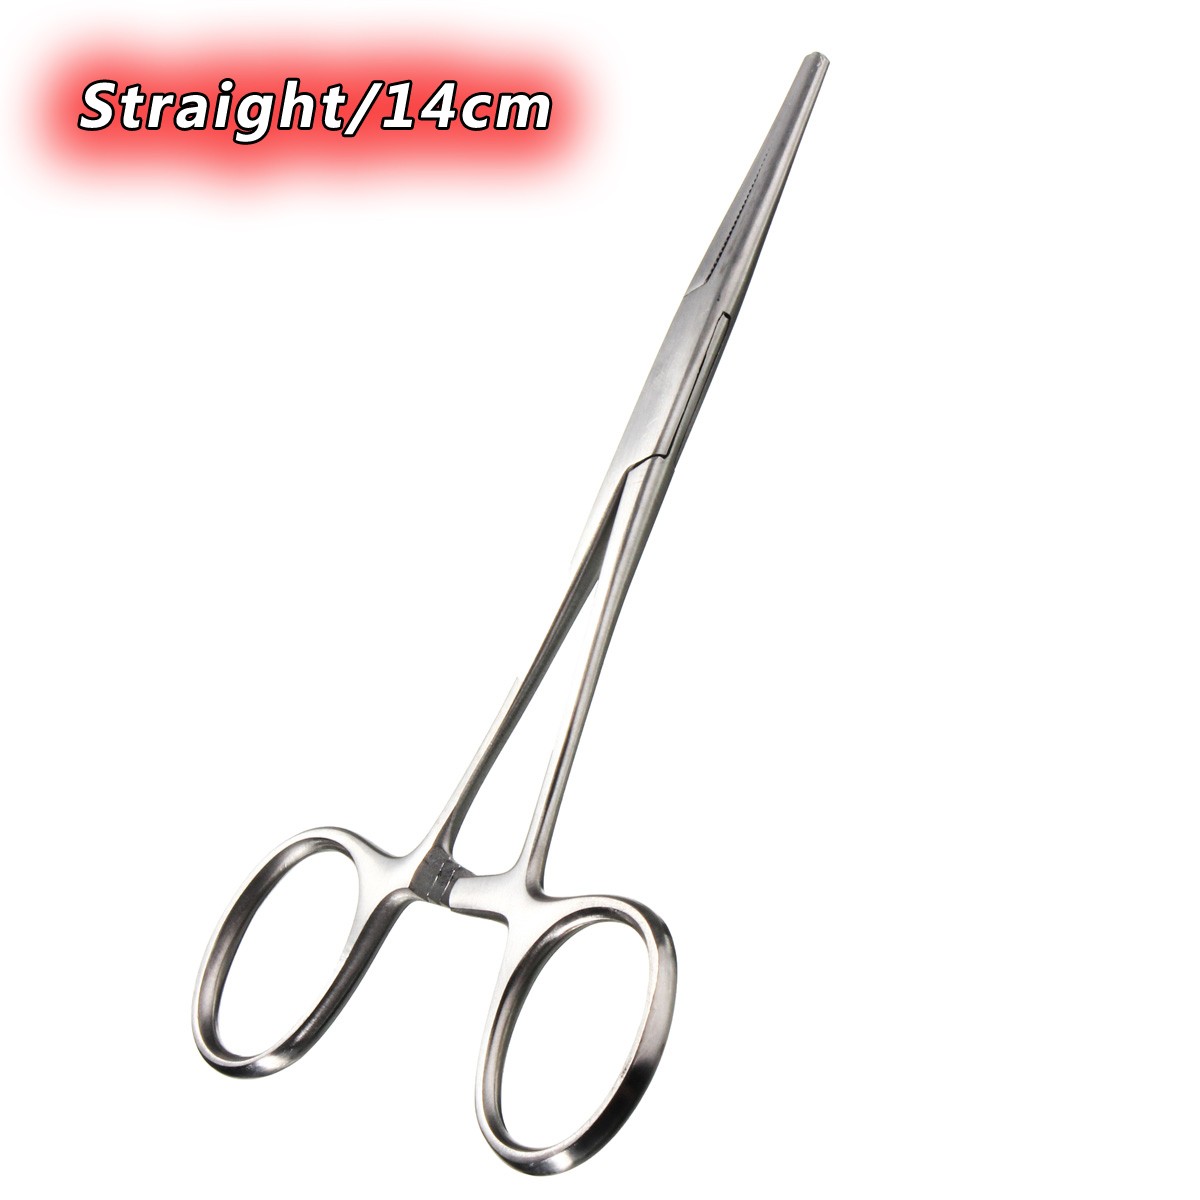 Hemostat-Forceps-Straight-Curved-Stainless-Steel-Locking-Clamp-1039903-4